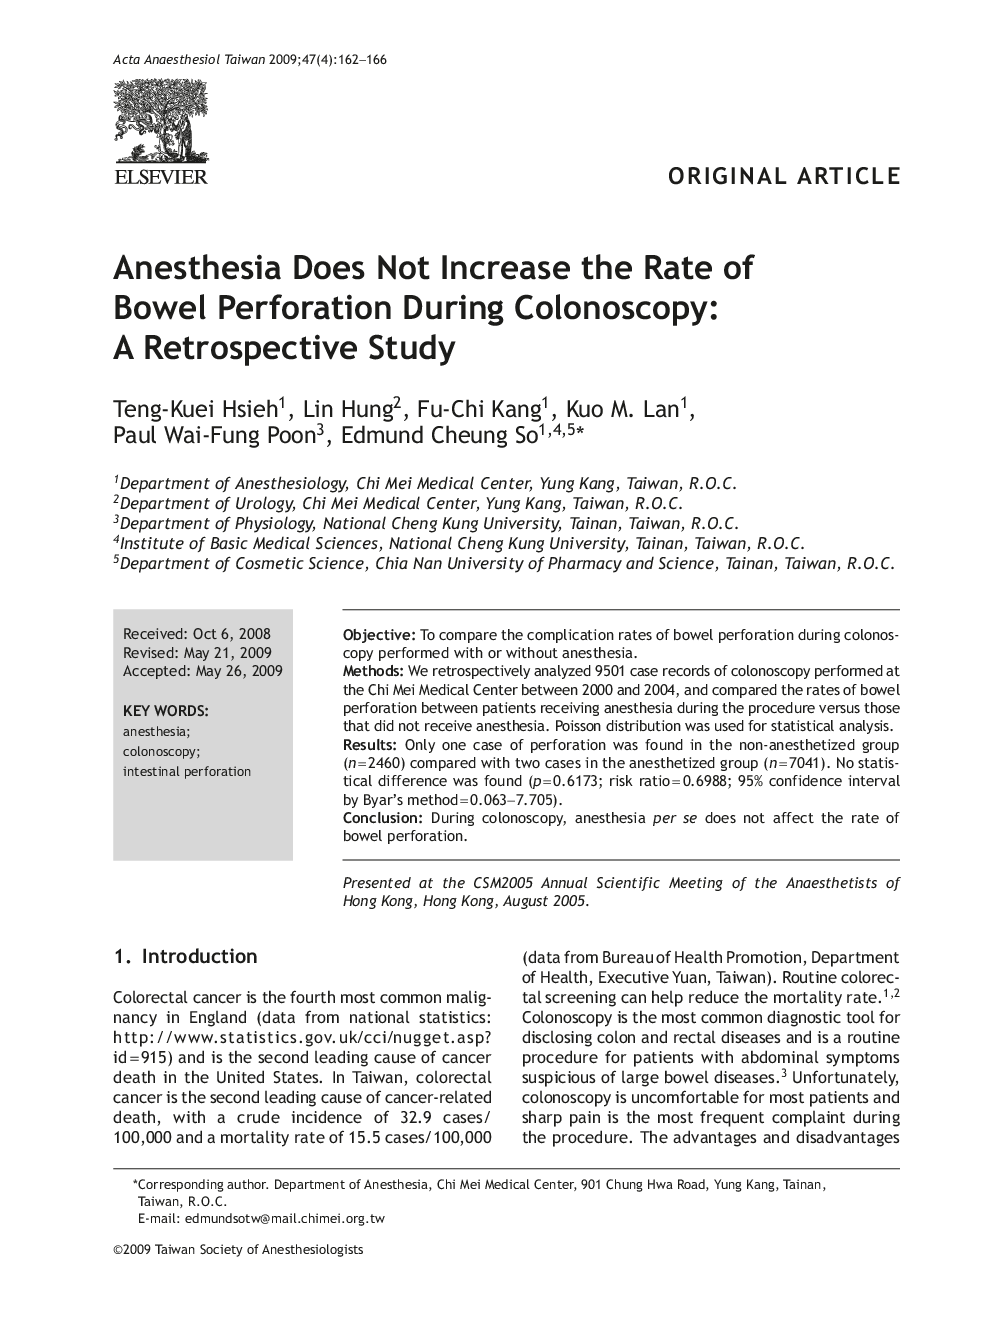 Anesthesia Does Not Increase the Rate of Bowel Perforation During Colonoscopy: A Retrospective Study 